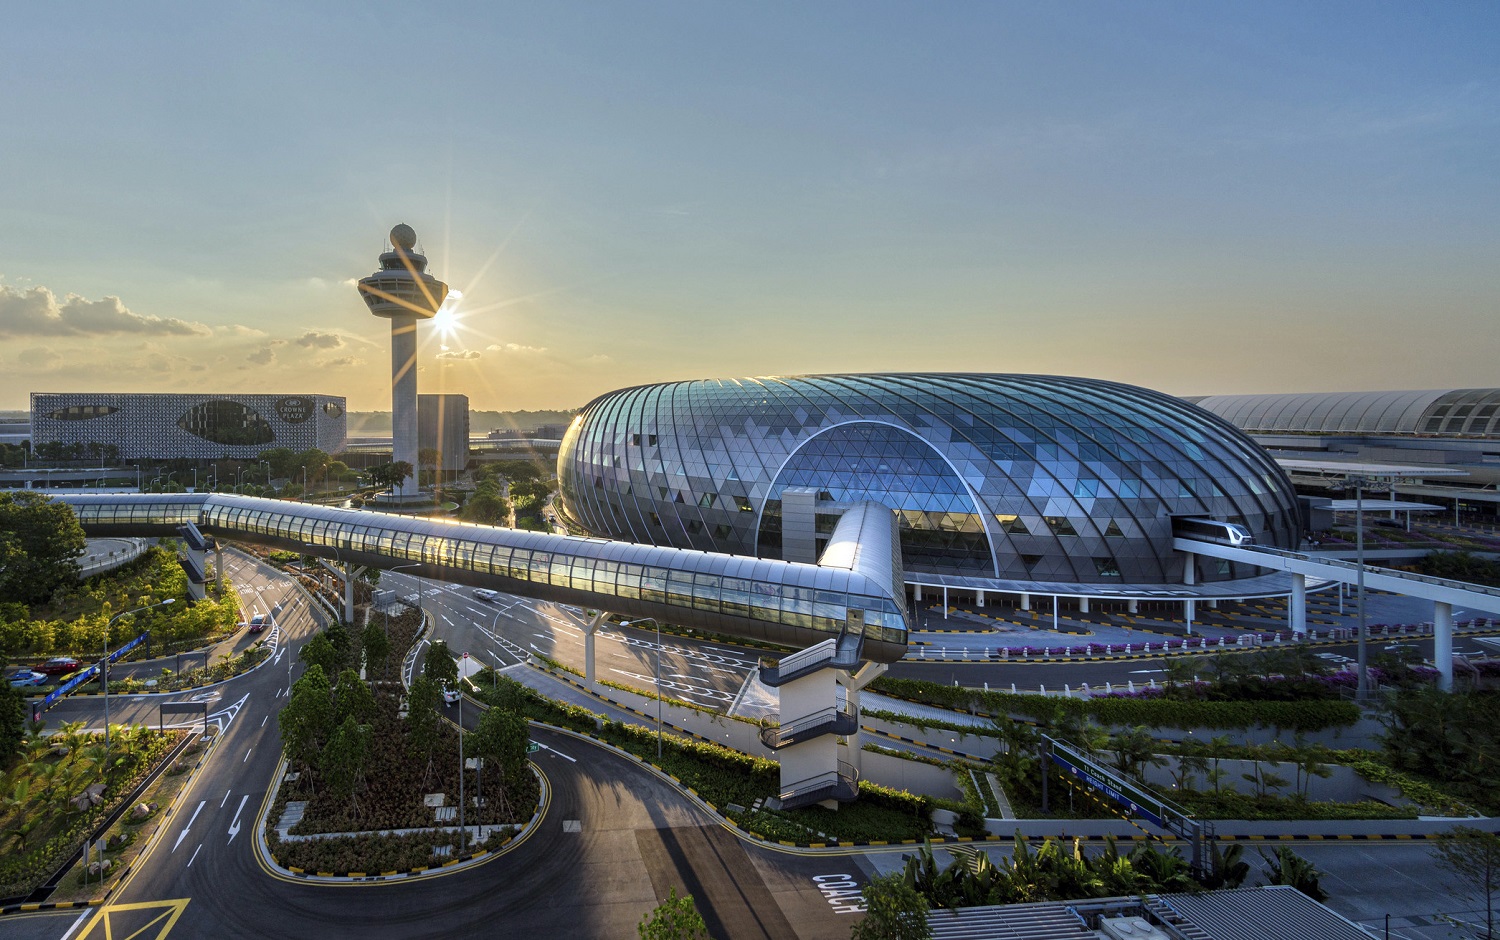 Exterior photo of Jewel Changi Airport, highlighting an all-glass bulbous building with a long pedestrian land bridge connecting to the structure